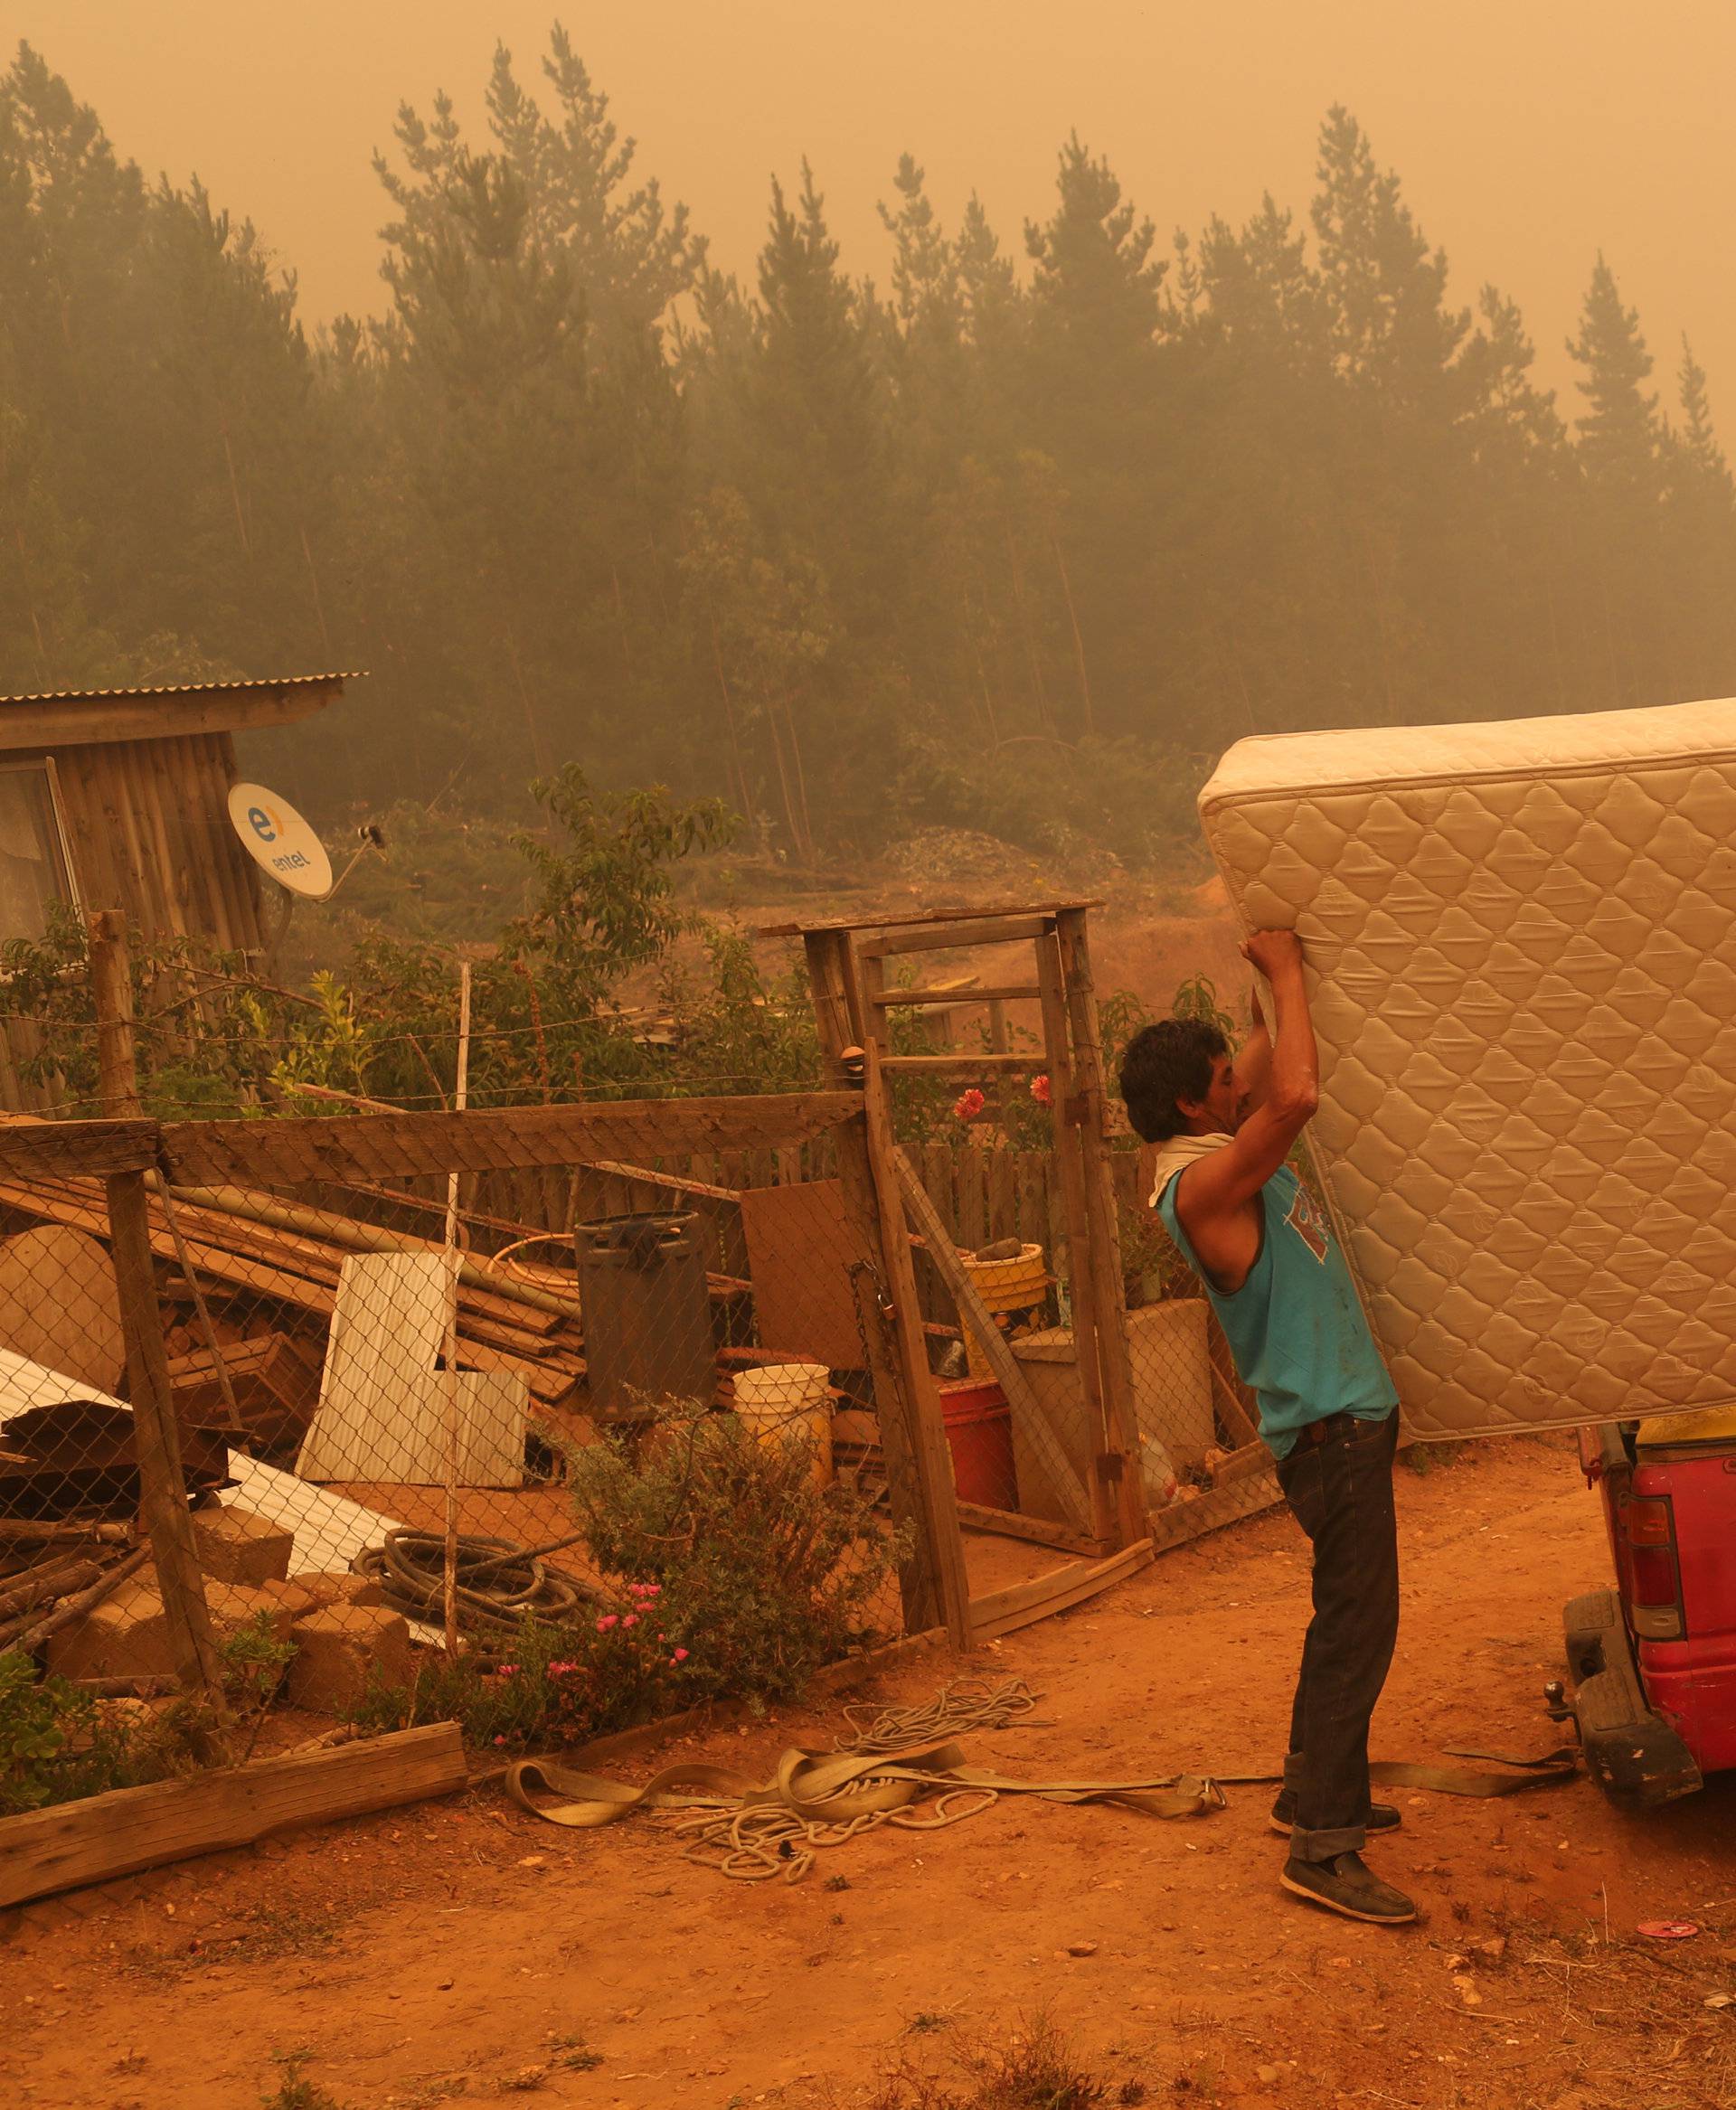 People load household goods into their vehicle while they prepare to evacuate the area in Santa Olga